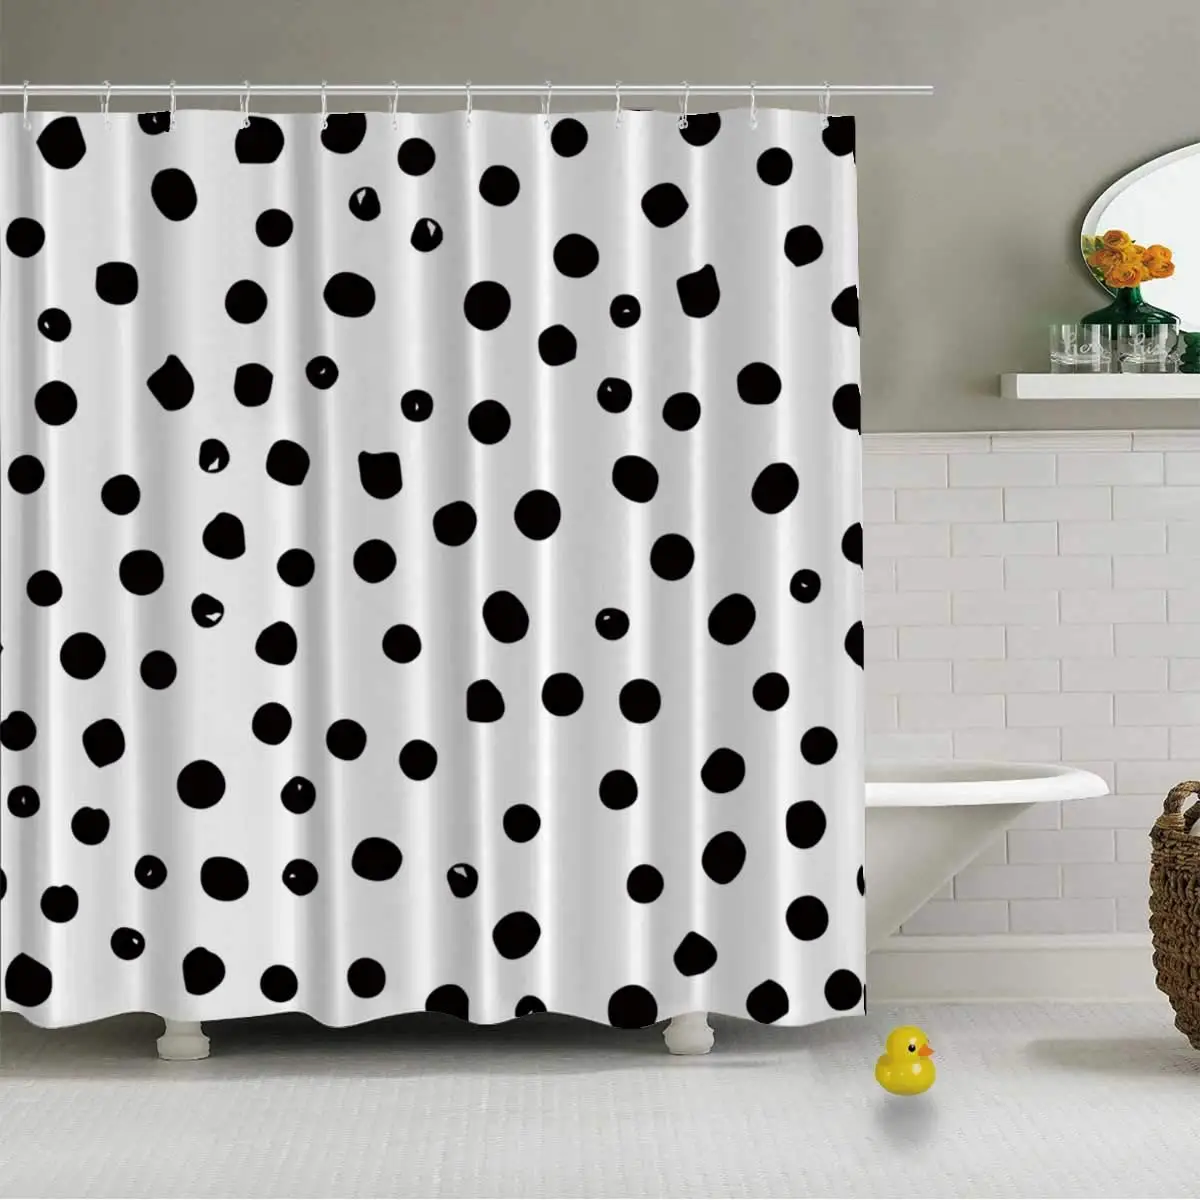 

Vector Seamless Hand Draw Polka Dot Vector Useful Shower Curtain for Home Office,79''L x 72''W